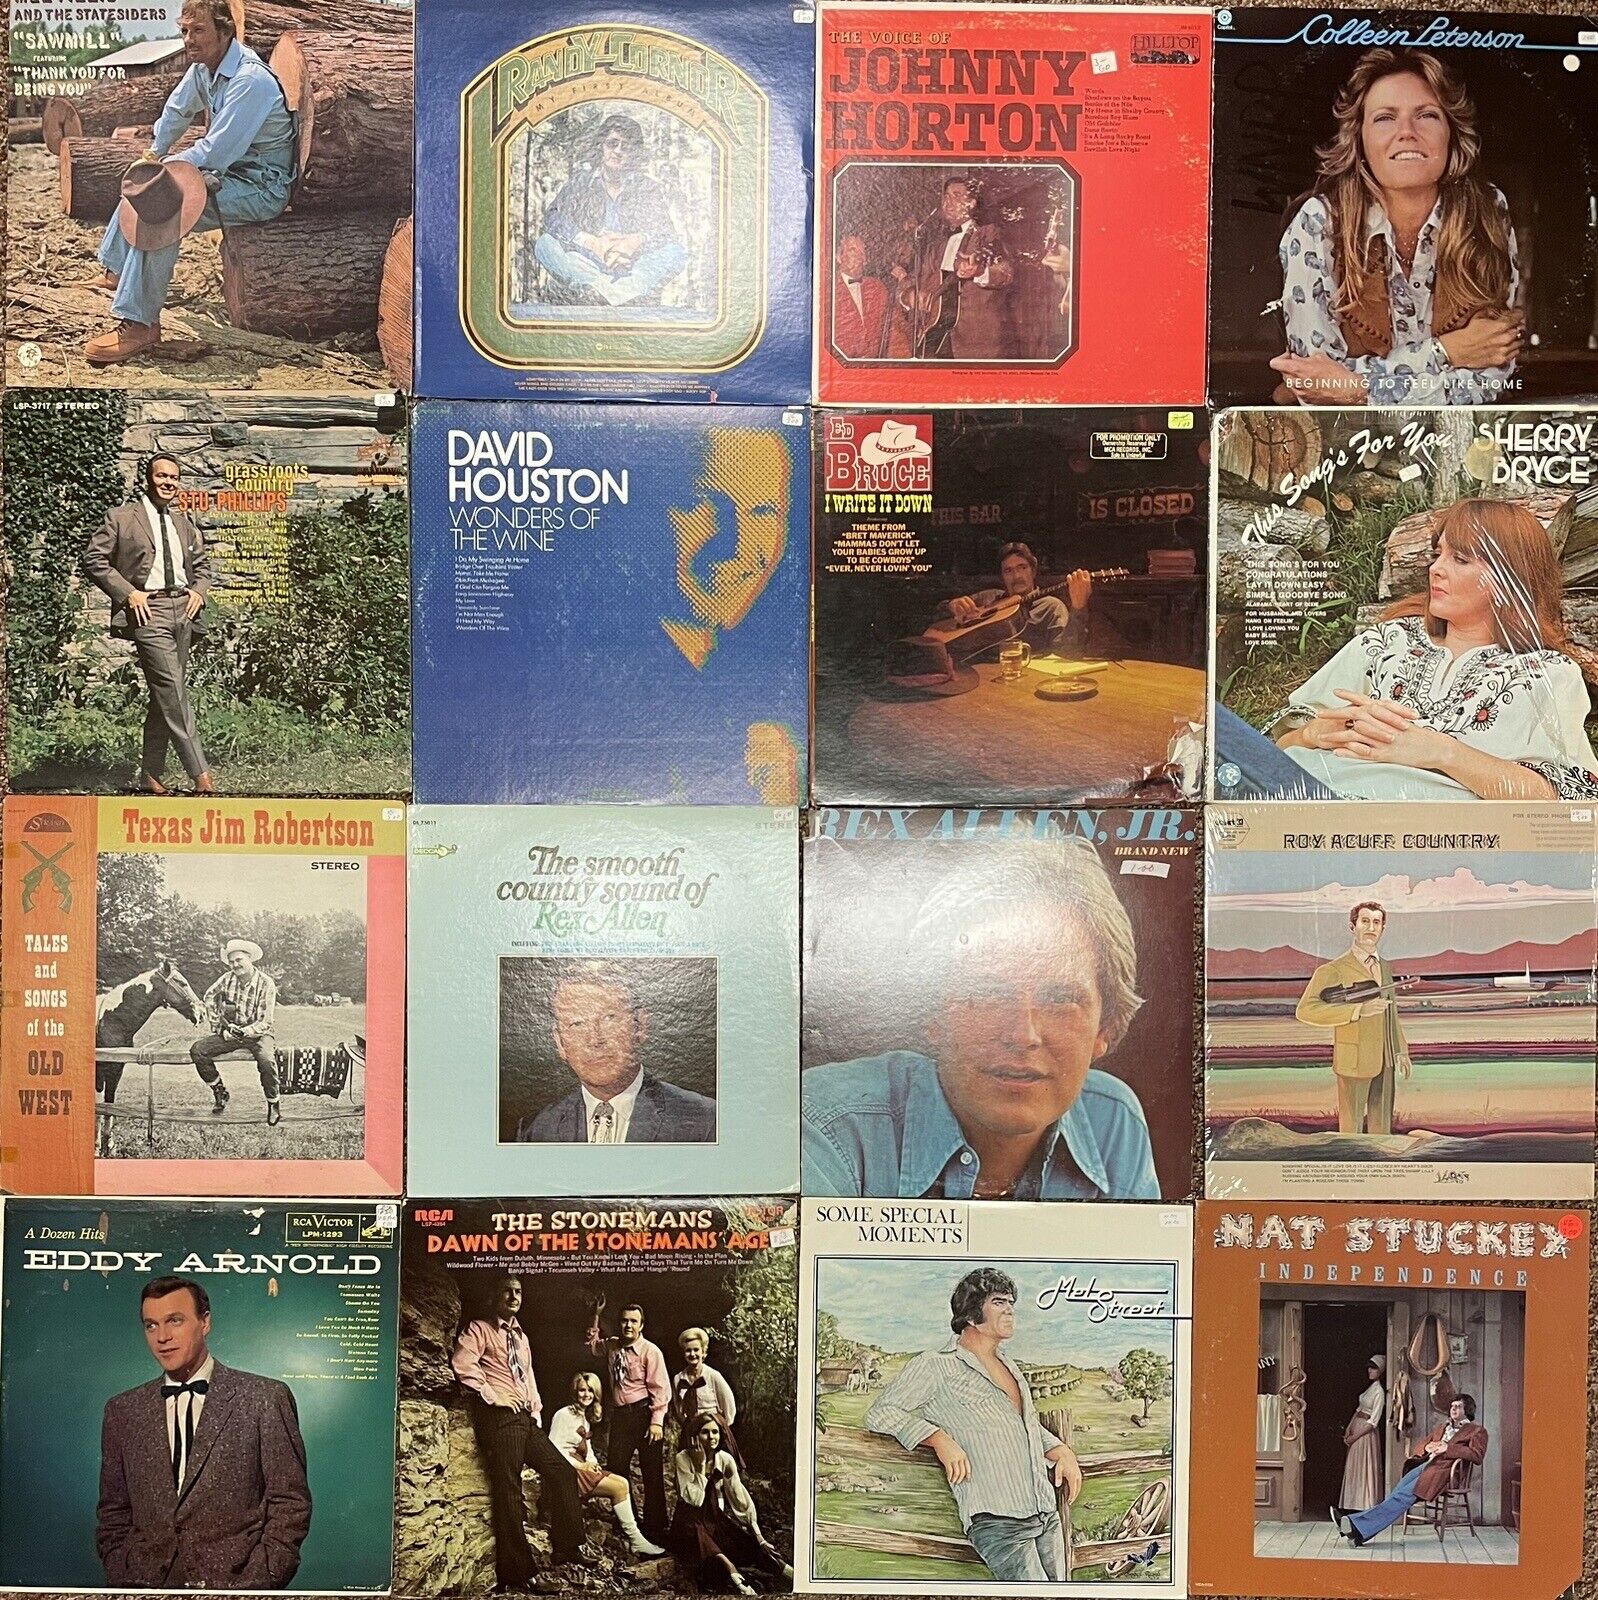 Lot of 75 Classic Country LP Records-Twitty,Dudley,Price,Snow,Horton,Robbins